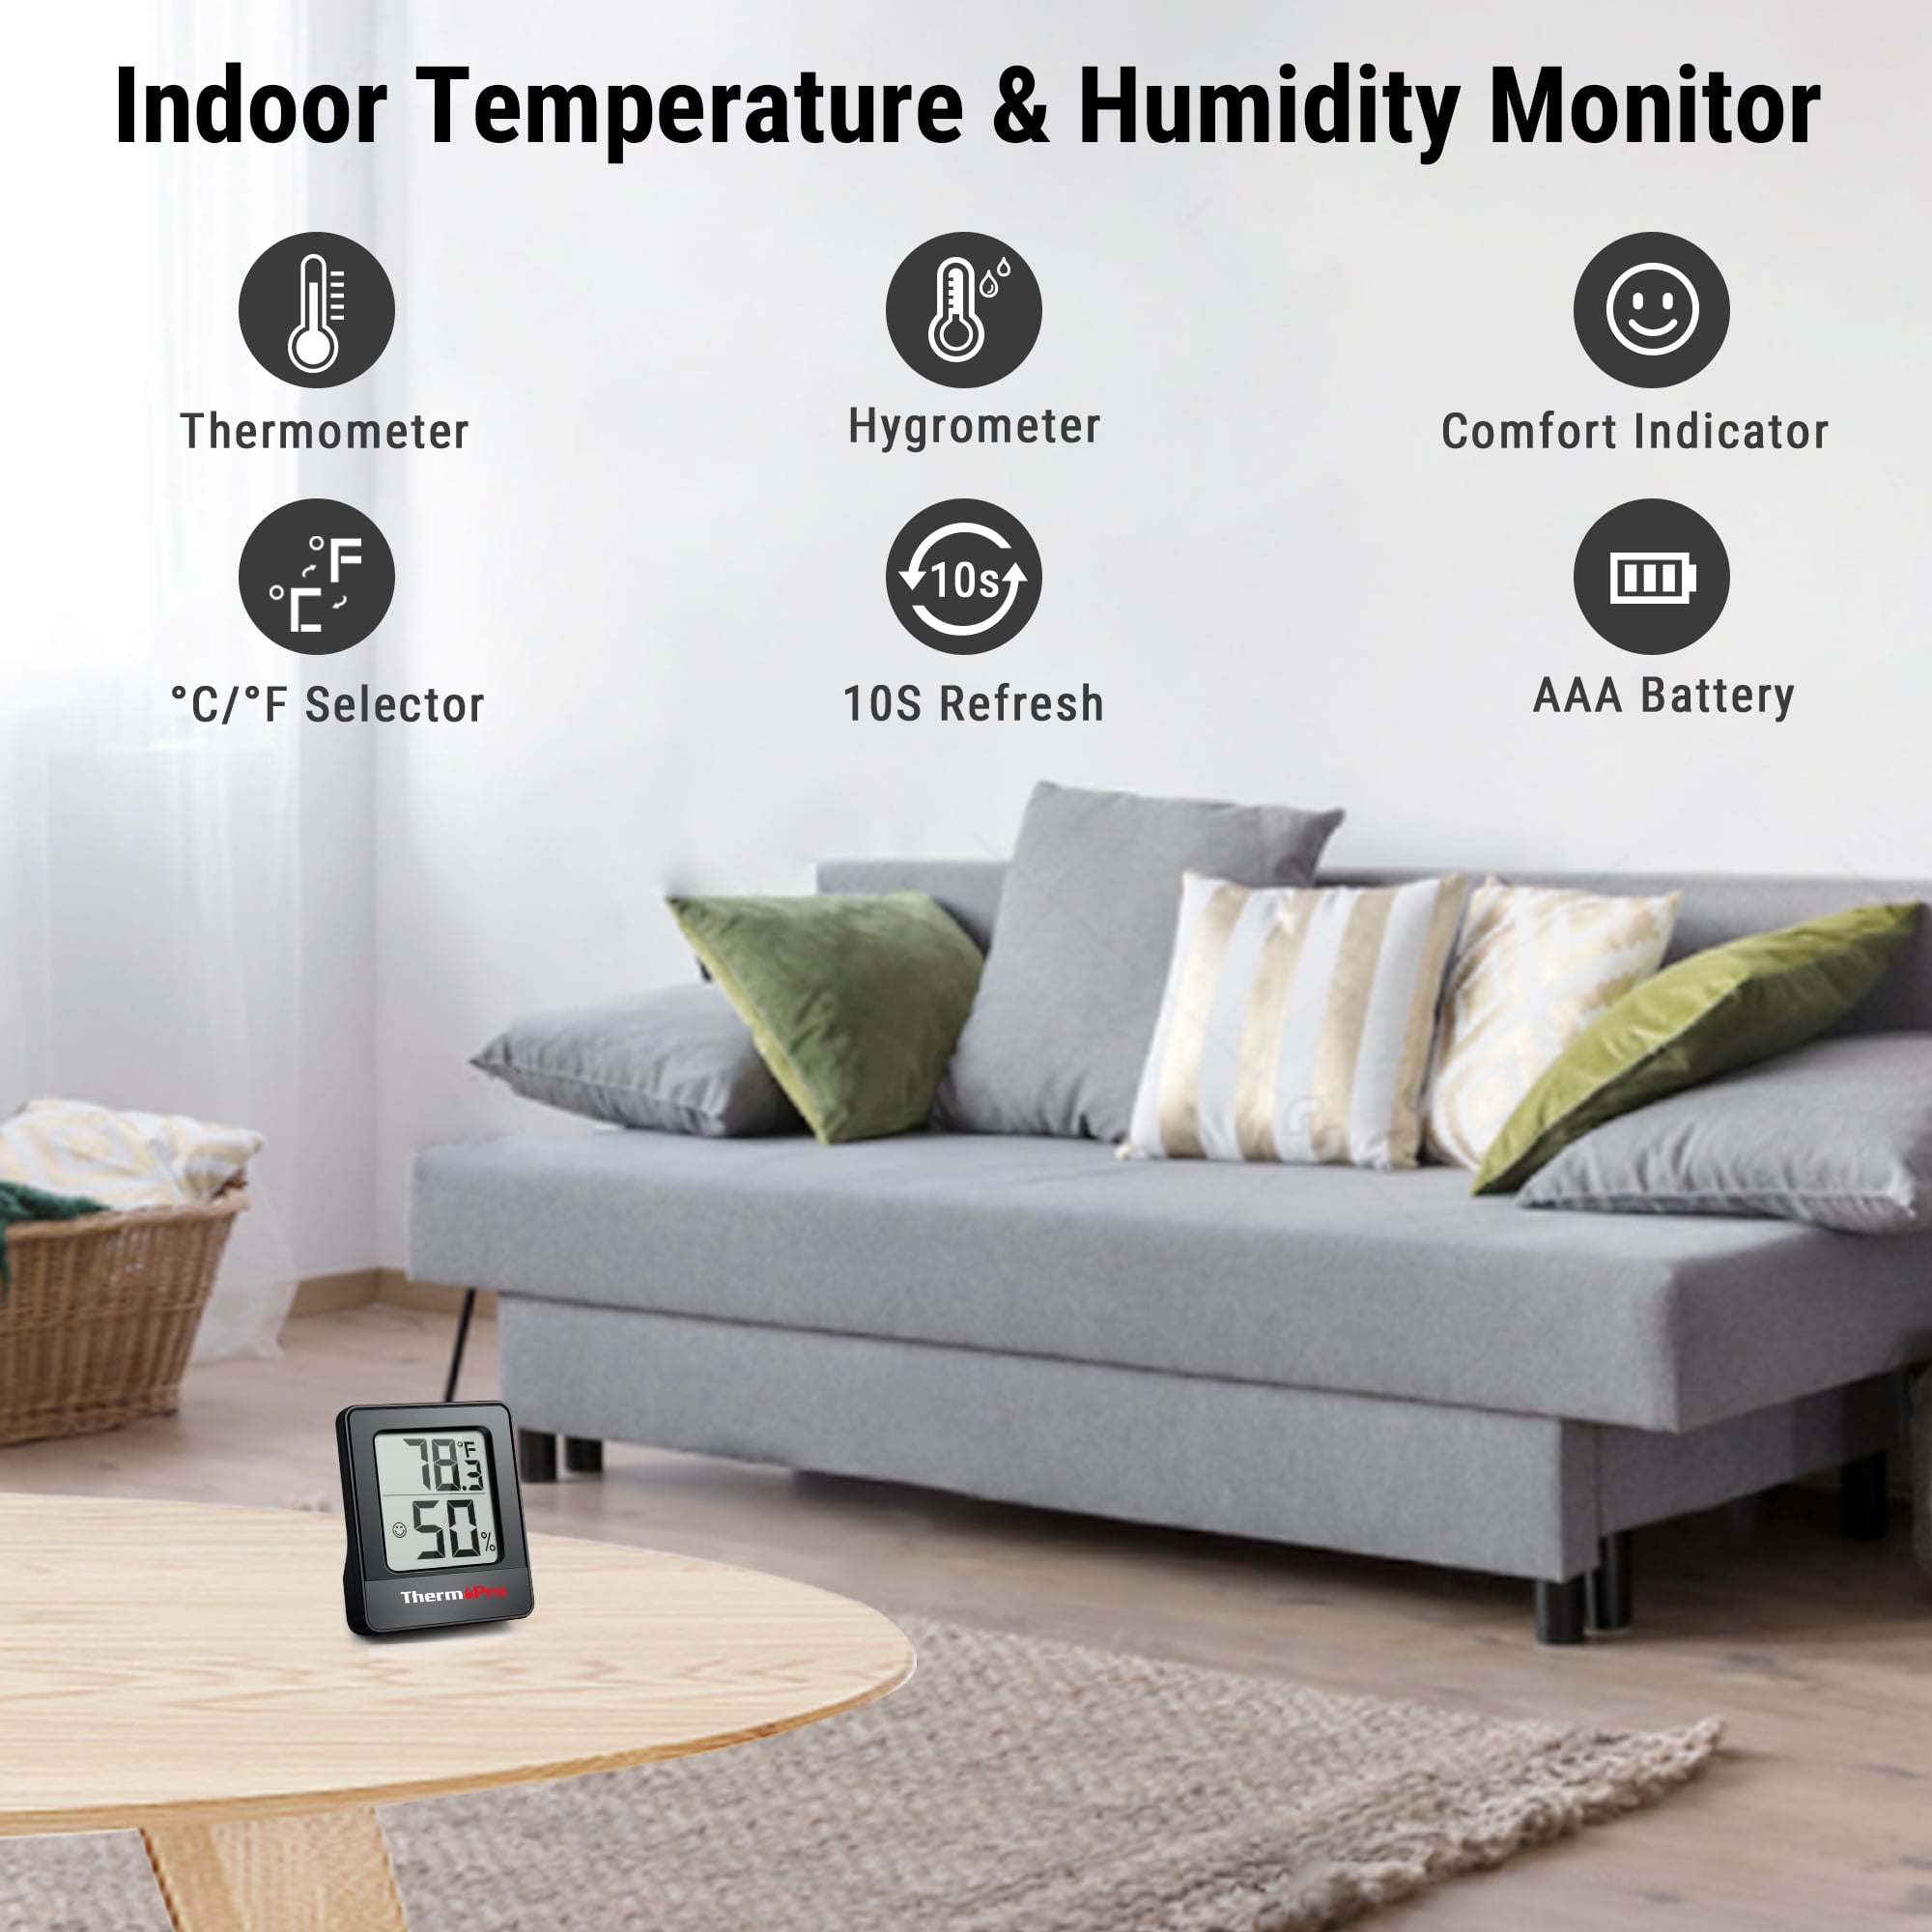  ThermoPro TP49 3 Pieces Digital Hygrometer Indoor Thermometer  Humidity Meter Mini Hygrometer Thermometer with Temperature and Humidity  Monitor Room Thermometer : Patio, Lawn & Garden